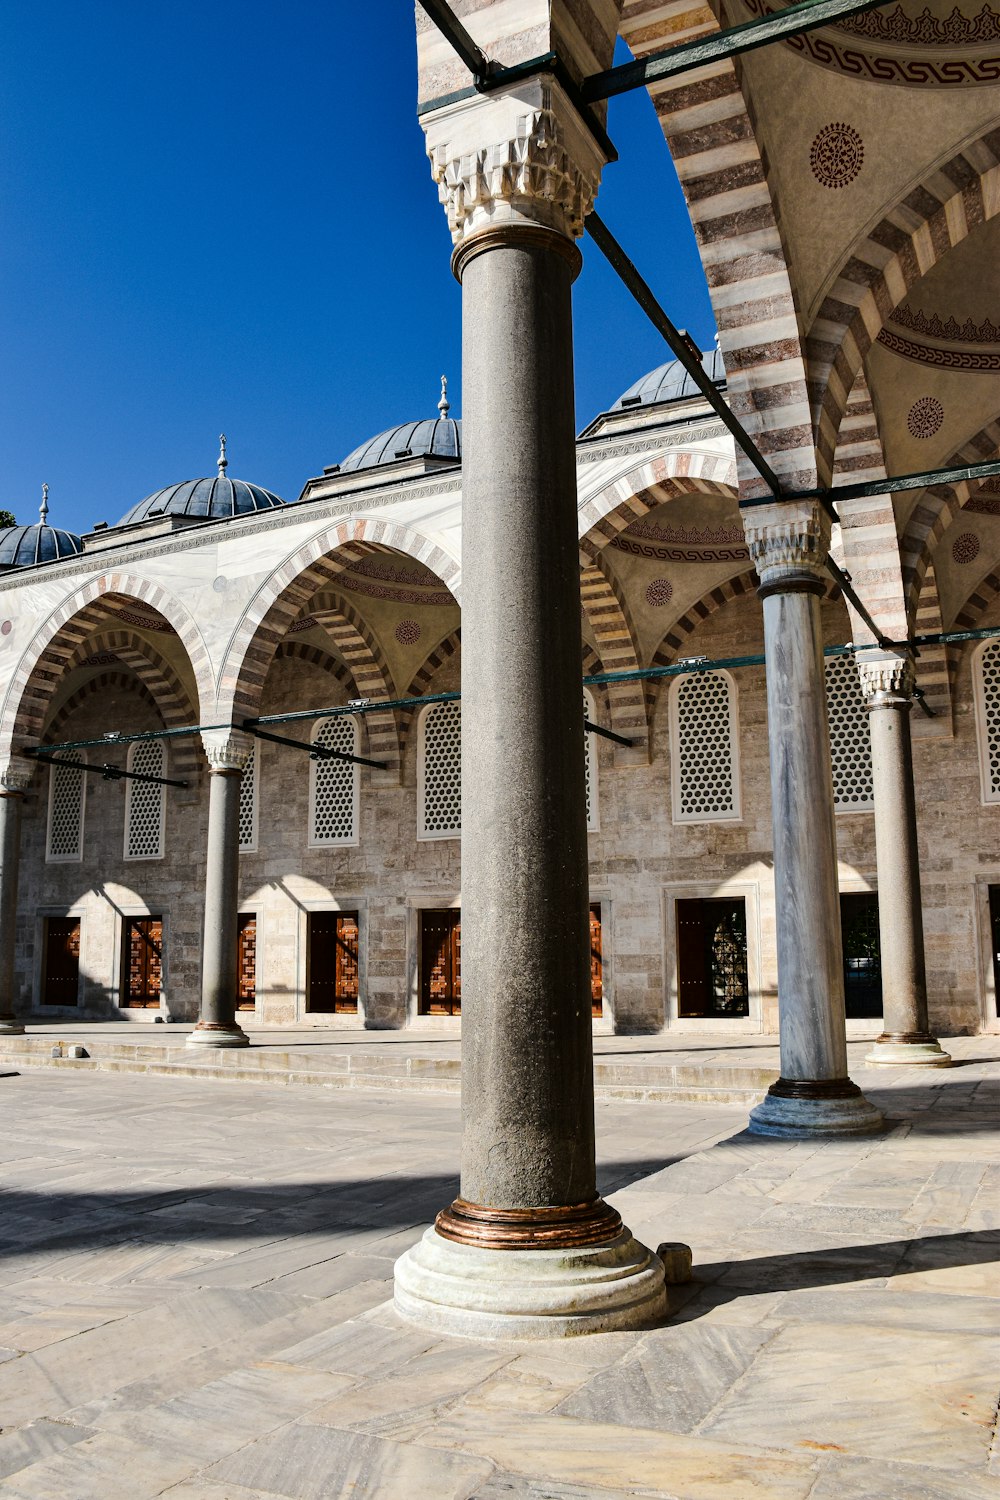 a large building with columns and arches in front of it